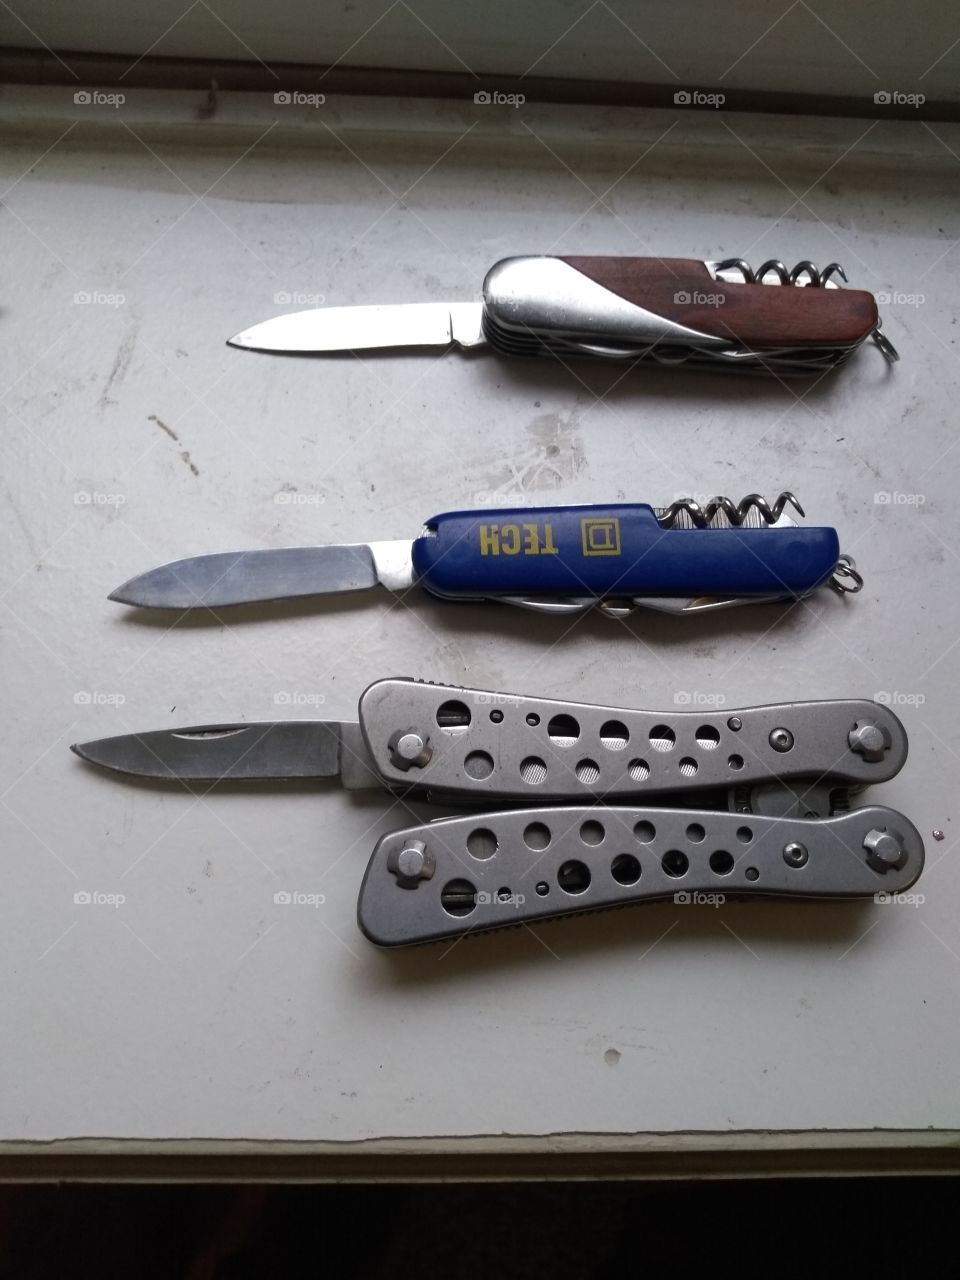 Array of knifes